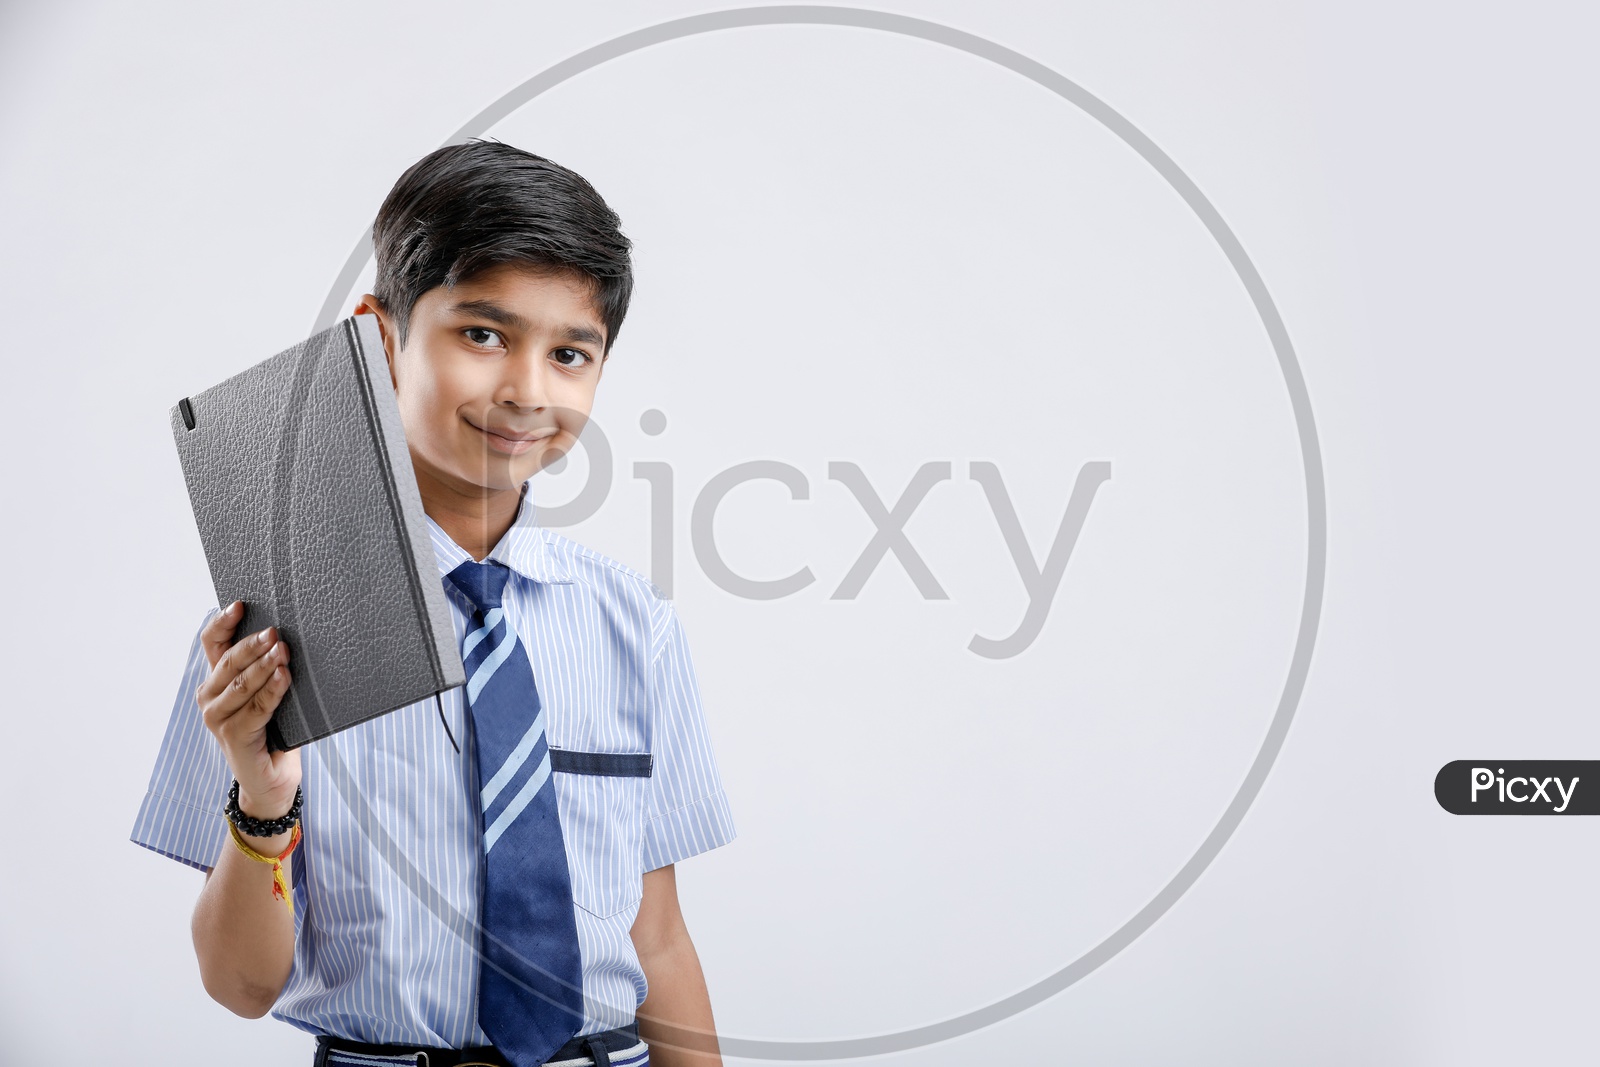 Cute Indian or Asian Kid Or Boy In School Uniform And Holding  Book   Over an Isolated White Background